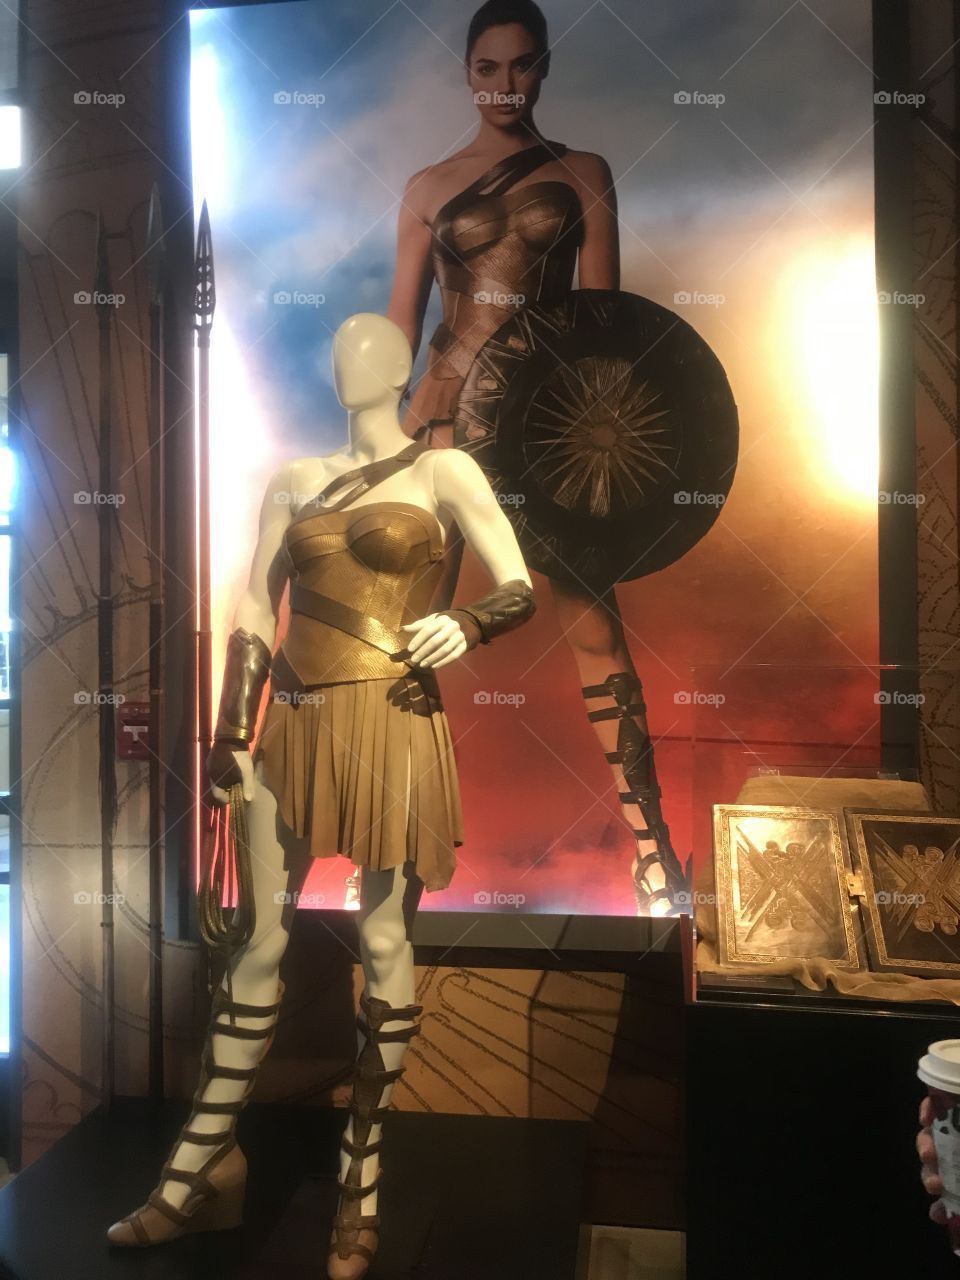 One of the original costumes in the Wonder Woman movies worn by gal gadot seen in the warner brothers studios